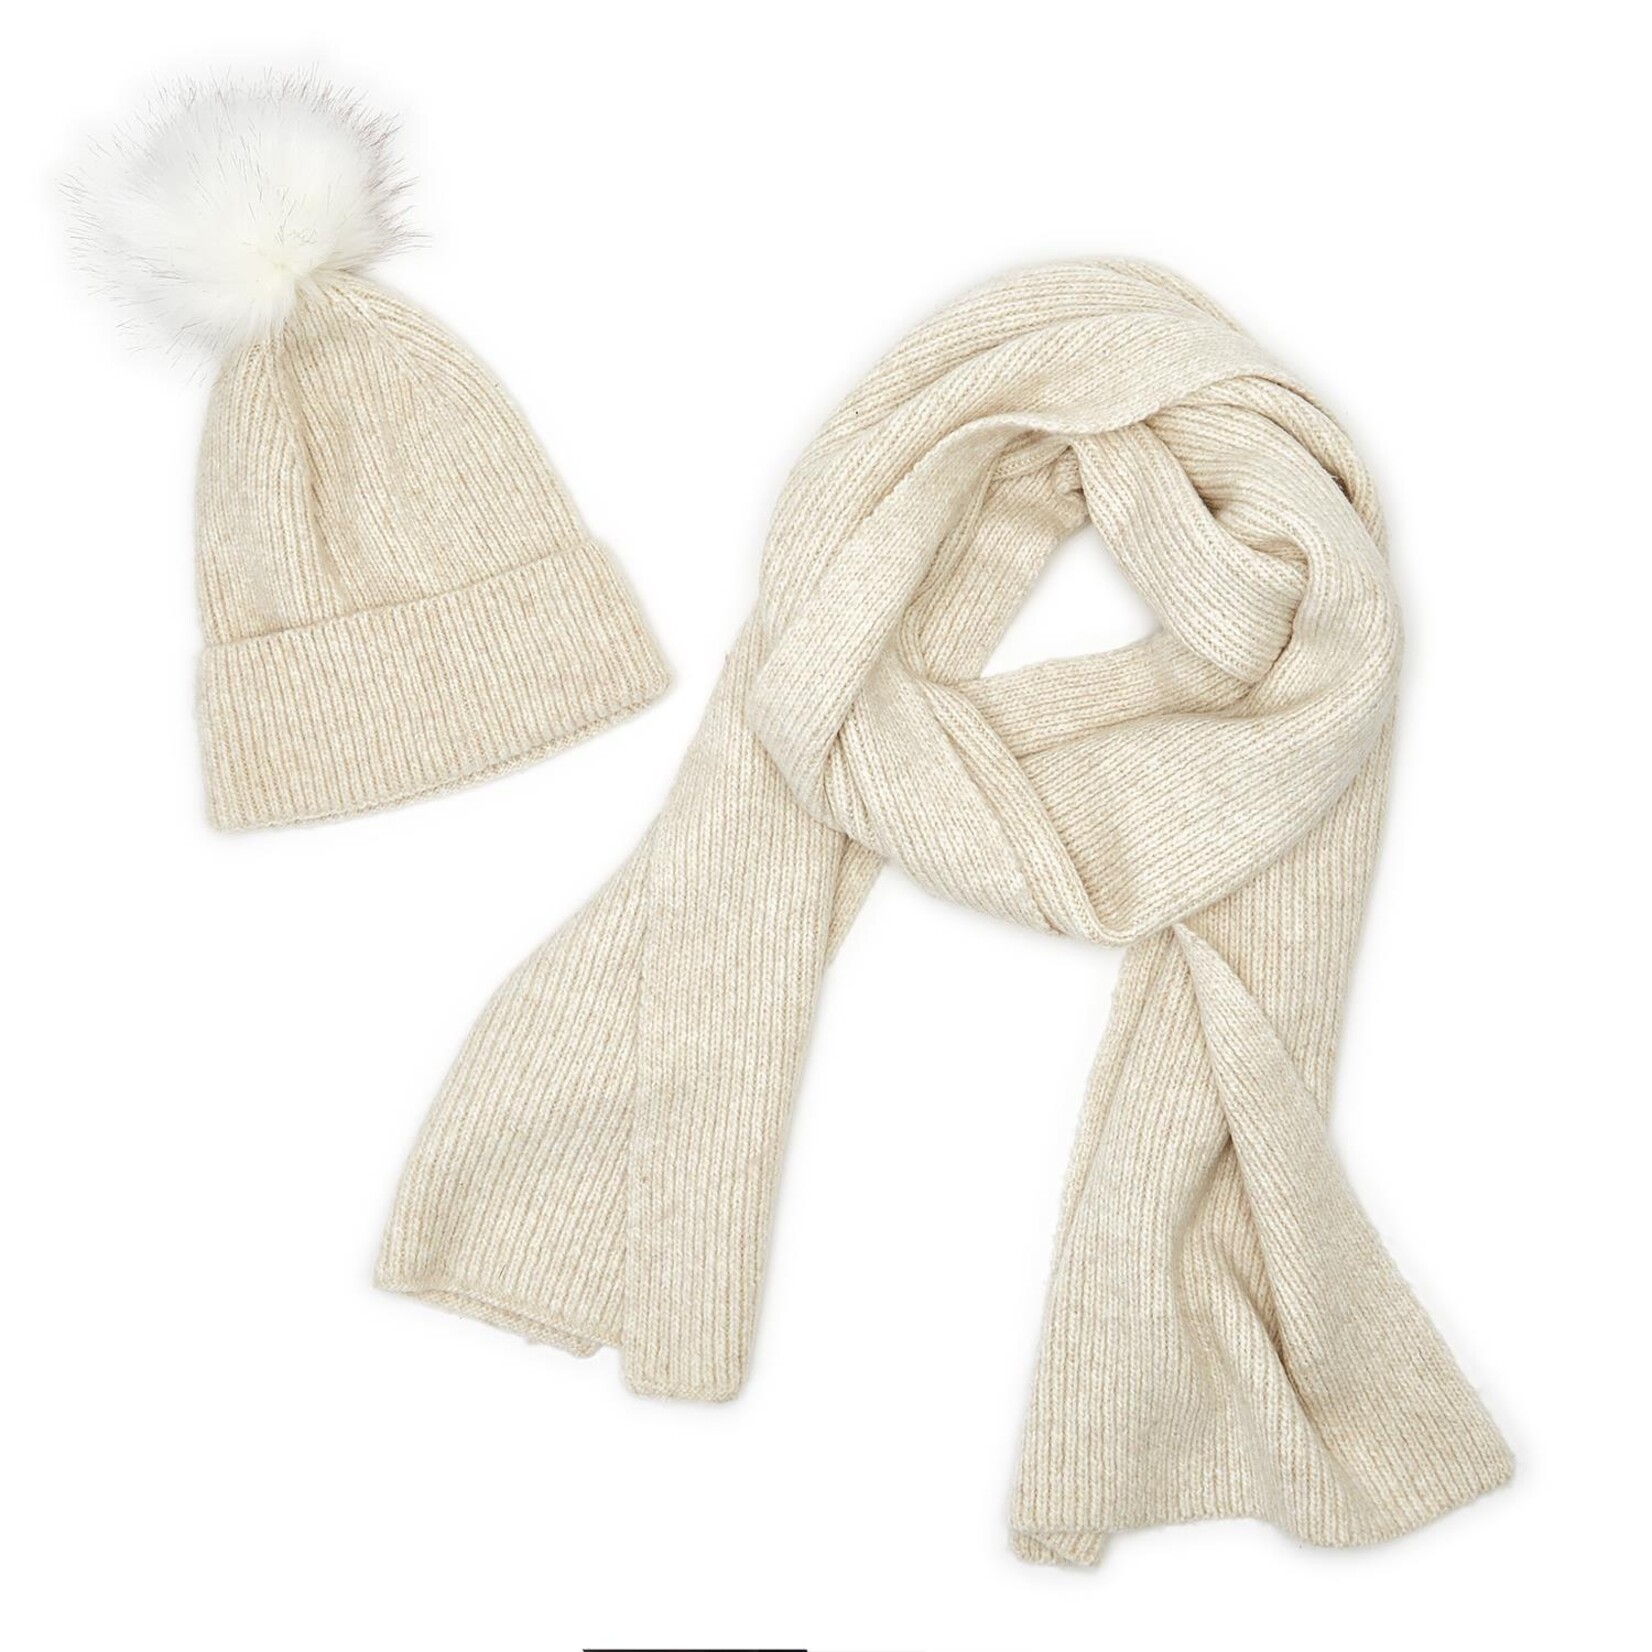 Two's Company Dynamic Duo Softer than Cashmere Knit Hat with Faux Fur Pom and Coordinating Knit Scarf